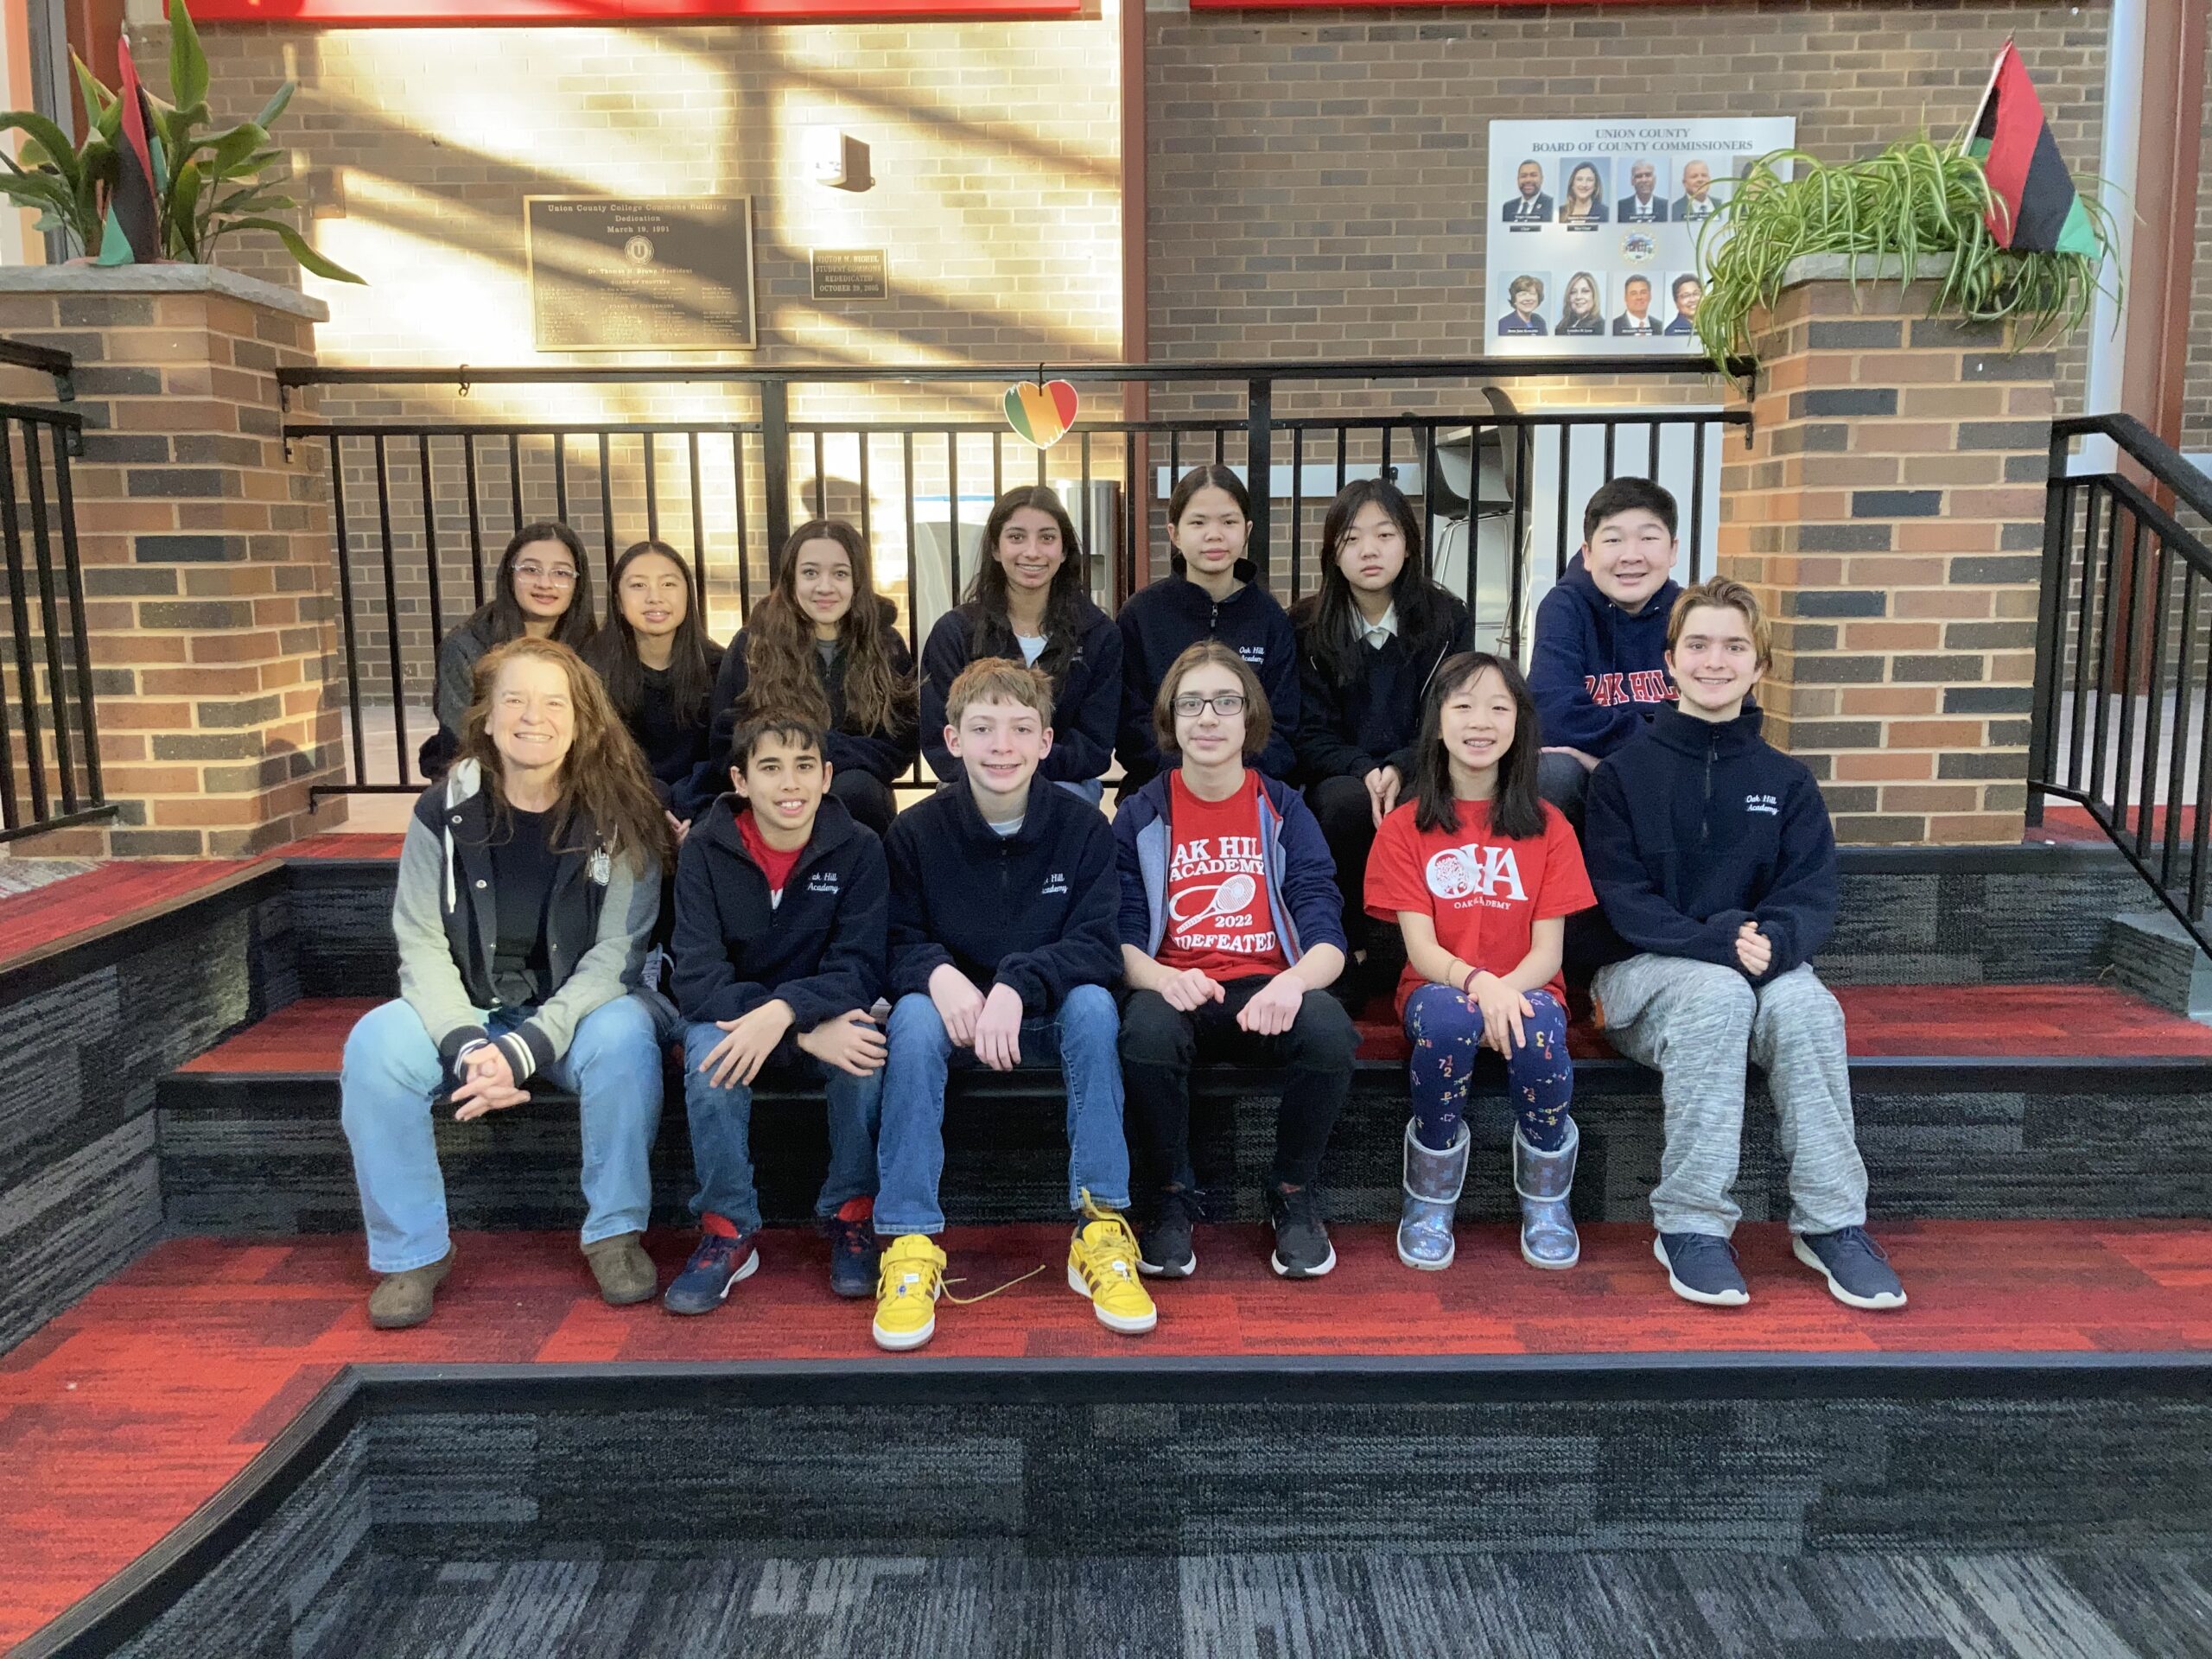 NJ Private School Oak Hill Academy has the Top Mathlete in MathCounts